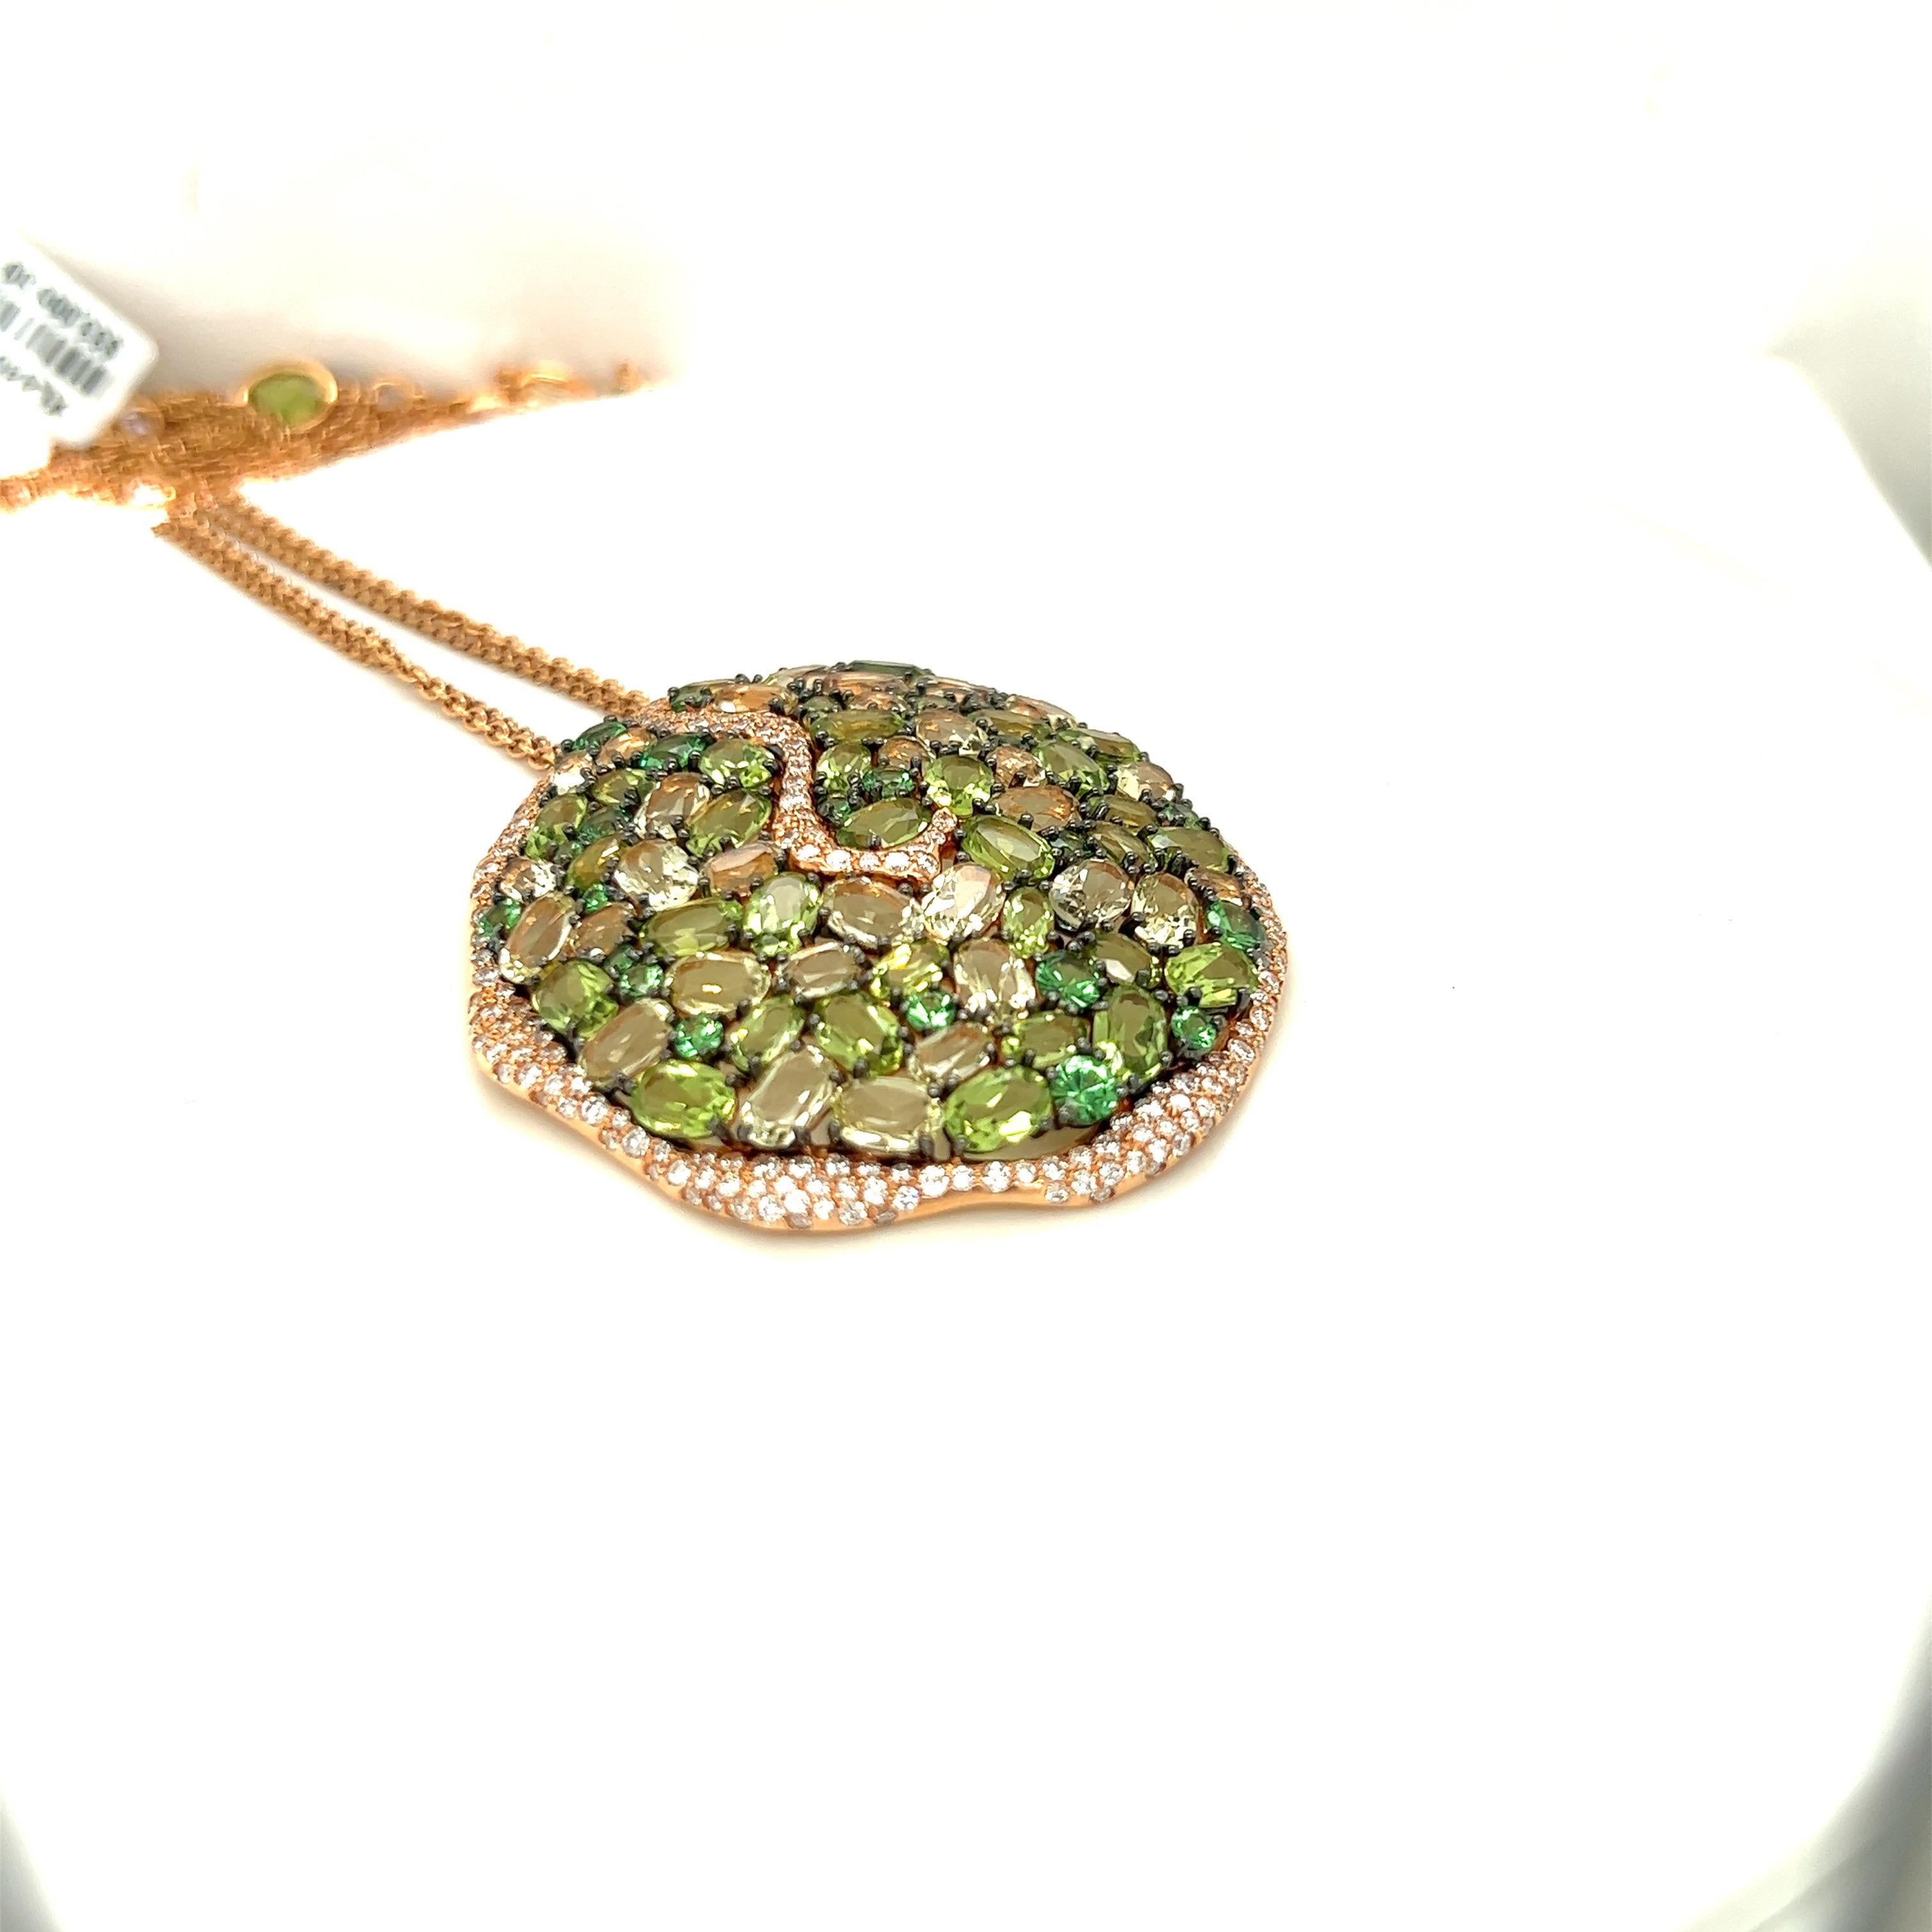 Rodney Rayner is known for his unique styling and use of beautiful color combinations. This 18 karat rose gold pendant necklace is a perfect example of his work. Various shades of oval peridot and lime green quartz stones are set in the organic